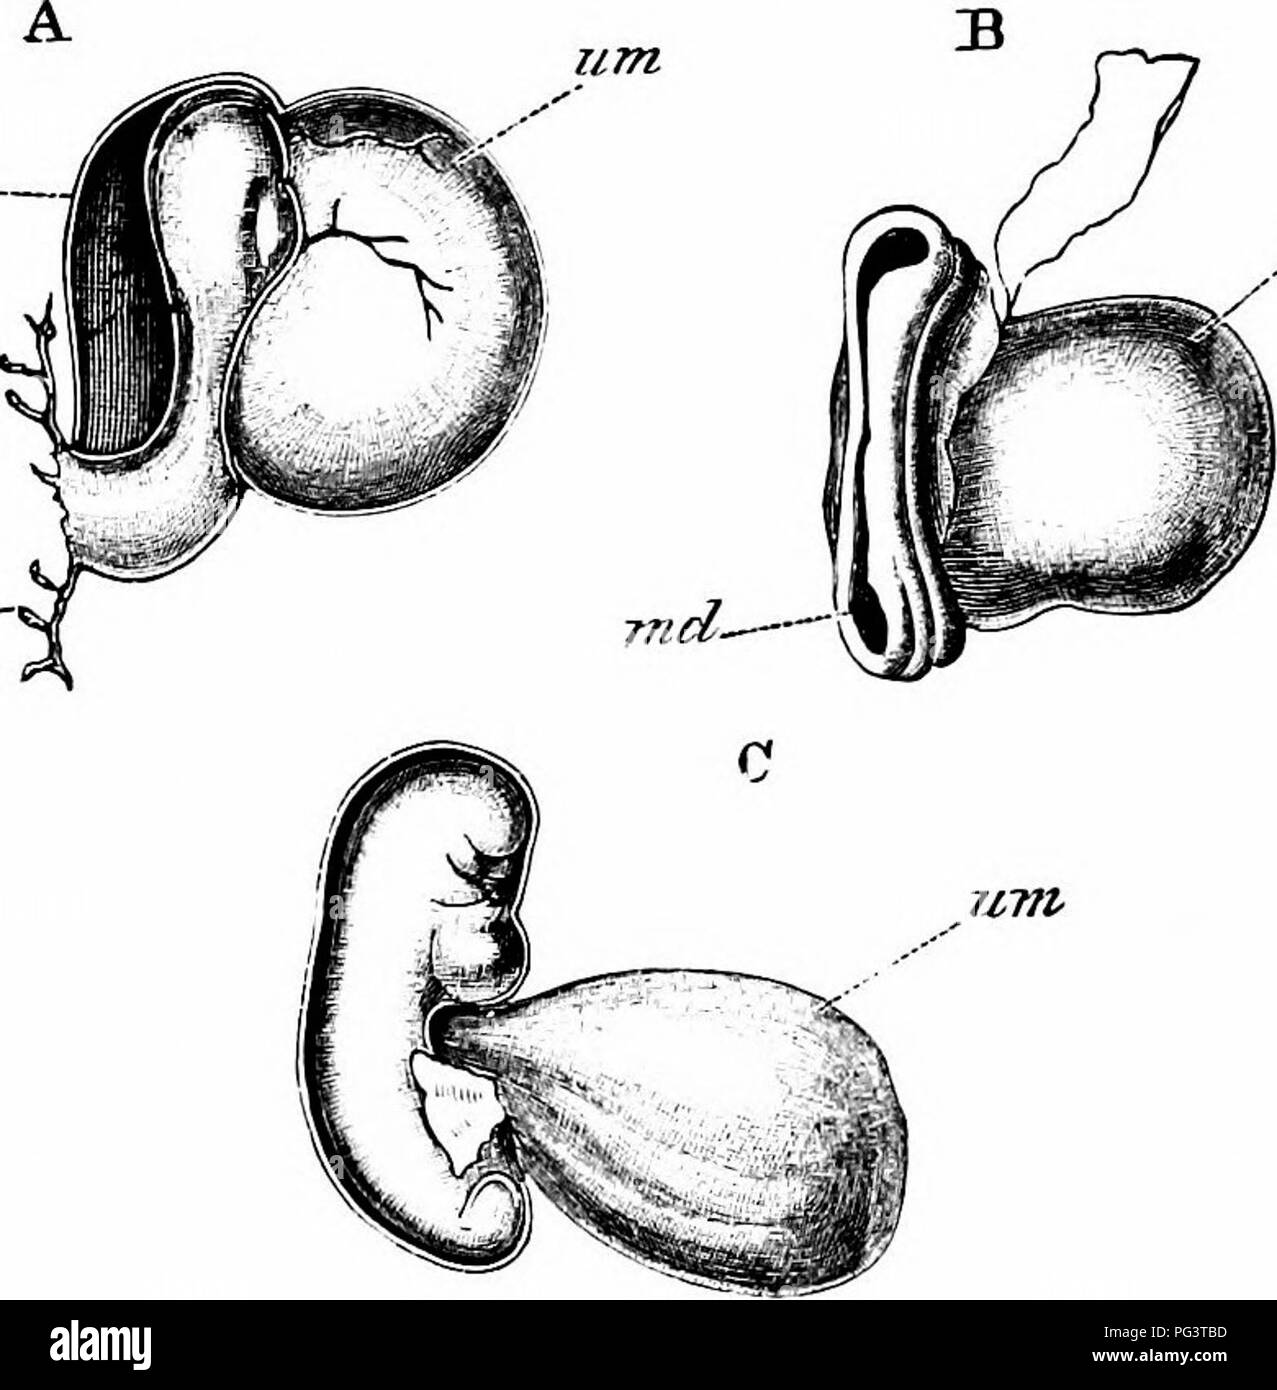 . The elements of embryology . Embryology. X.] THE HUMAN EMBRYO. Fia. 110. 337 air/i fi^--. zem Three Eaelt Human Embryos. (Copied from His.) A. Side view of an early embryo described by His. B. Embryo of about 12—14 days described by AUen Thom- son. C. Young embryo described by His. am. amnion; md. medullary groove; wn. umbilical vesicle; ch. chorion, to which the embryo is attached by a stalk. and yolk-sac filled up but a very small part of the whole cavity of the vesicle. The embryo, which was probably not quite normal (Fig. 110 A), was very imperfectly developed; a me- dullary plate was ha Stock Photo